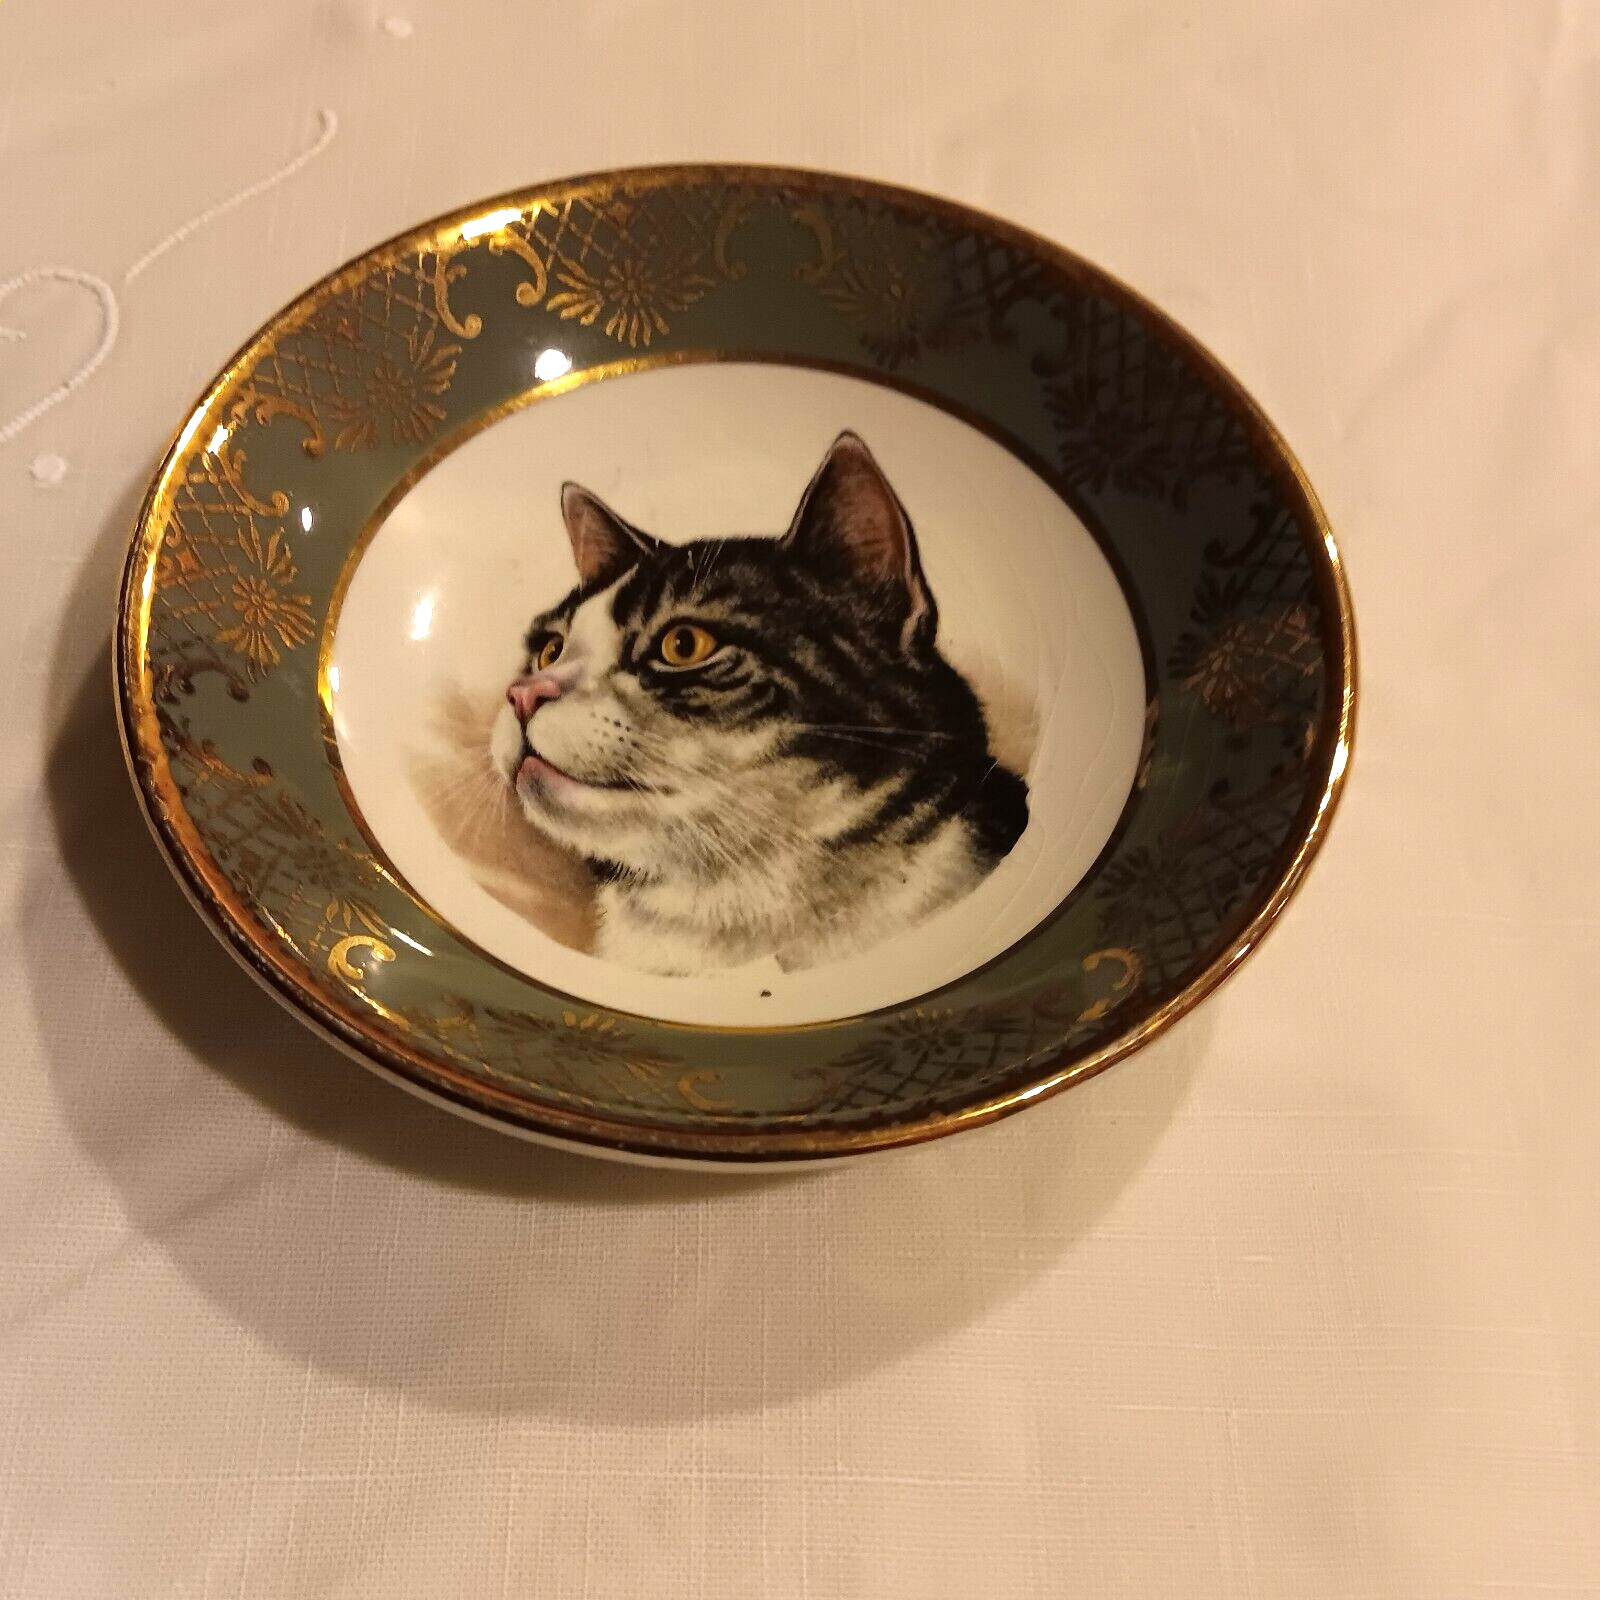 Grey Cat tabby crown ducal England antique 4” plate ENGLAND FALCON WARE 2-73